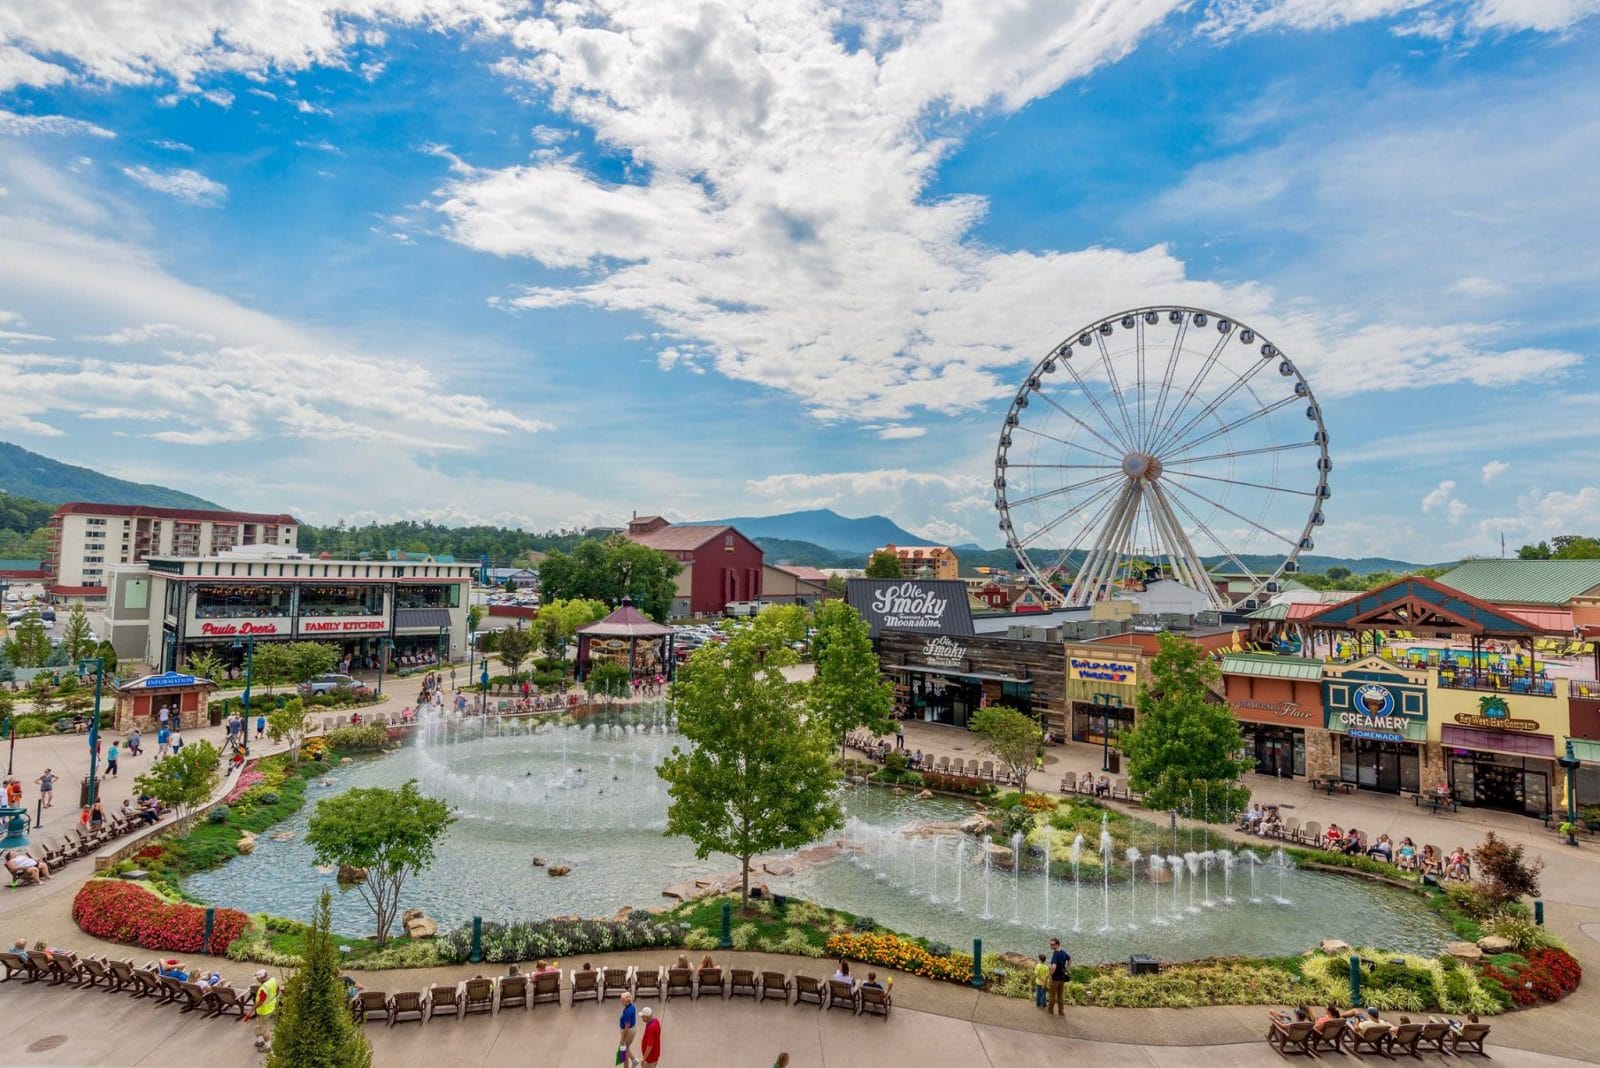 the-island-in-pigeon-forge-tn-family-entertainment-center